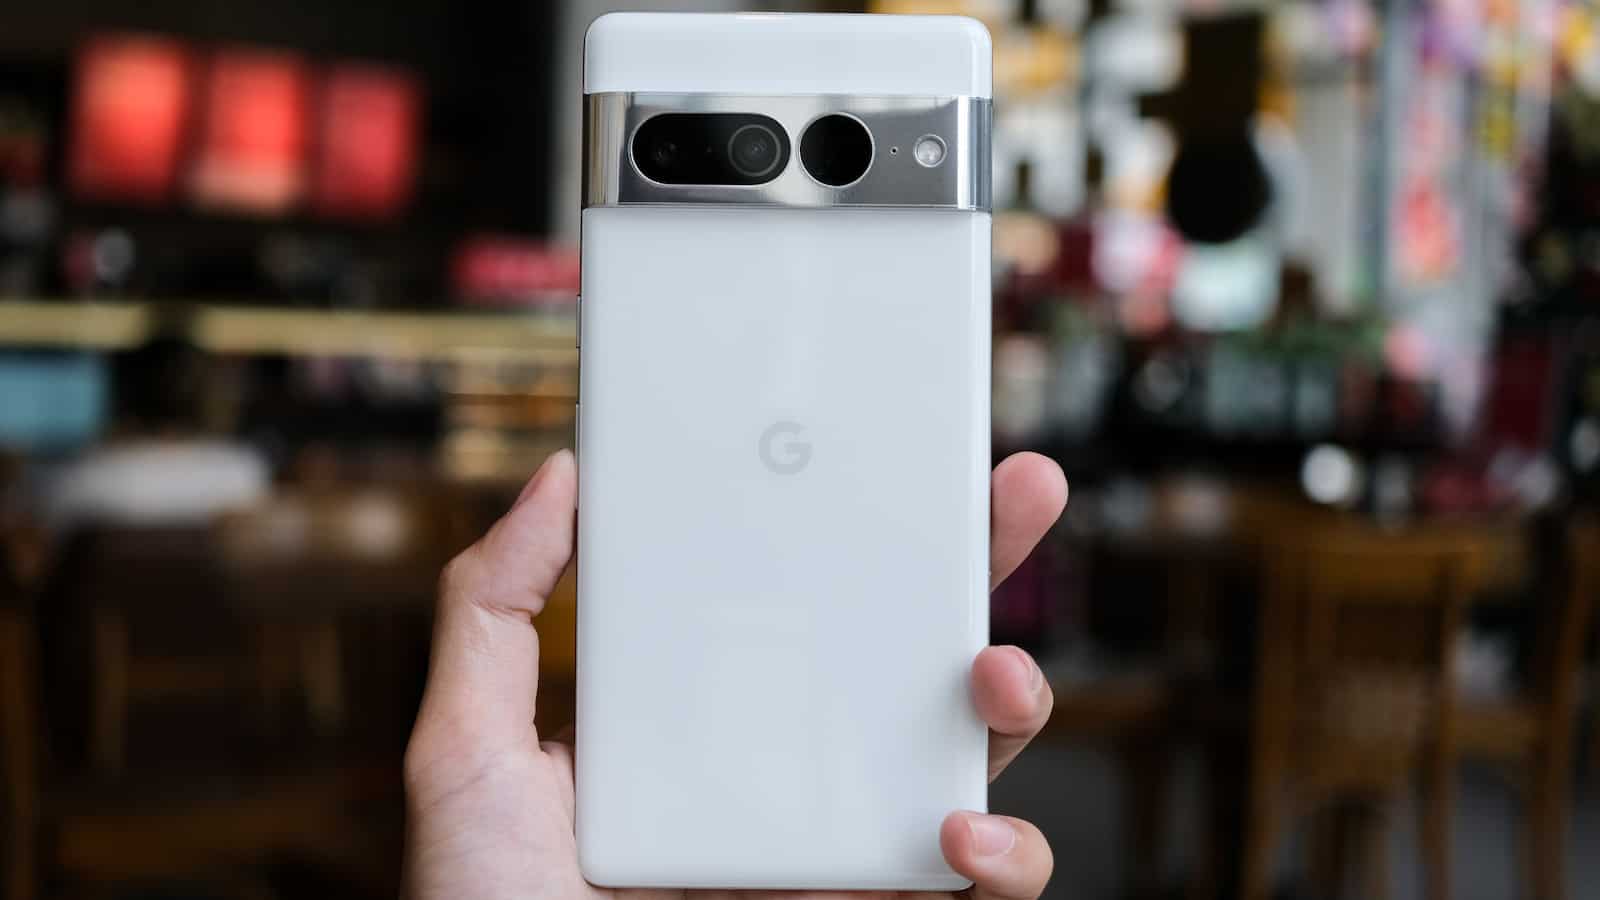 Pixel 6 long-term review: All the 'Pros' with few of the cons - 9to5Google